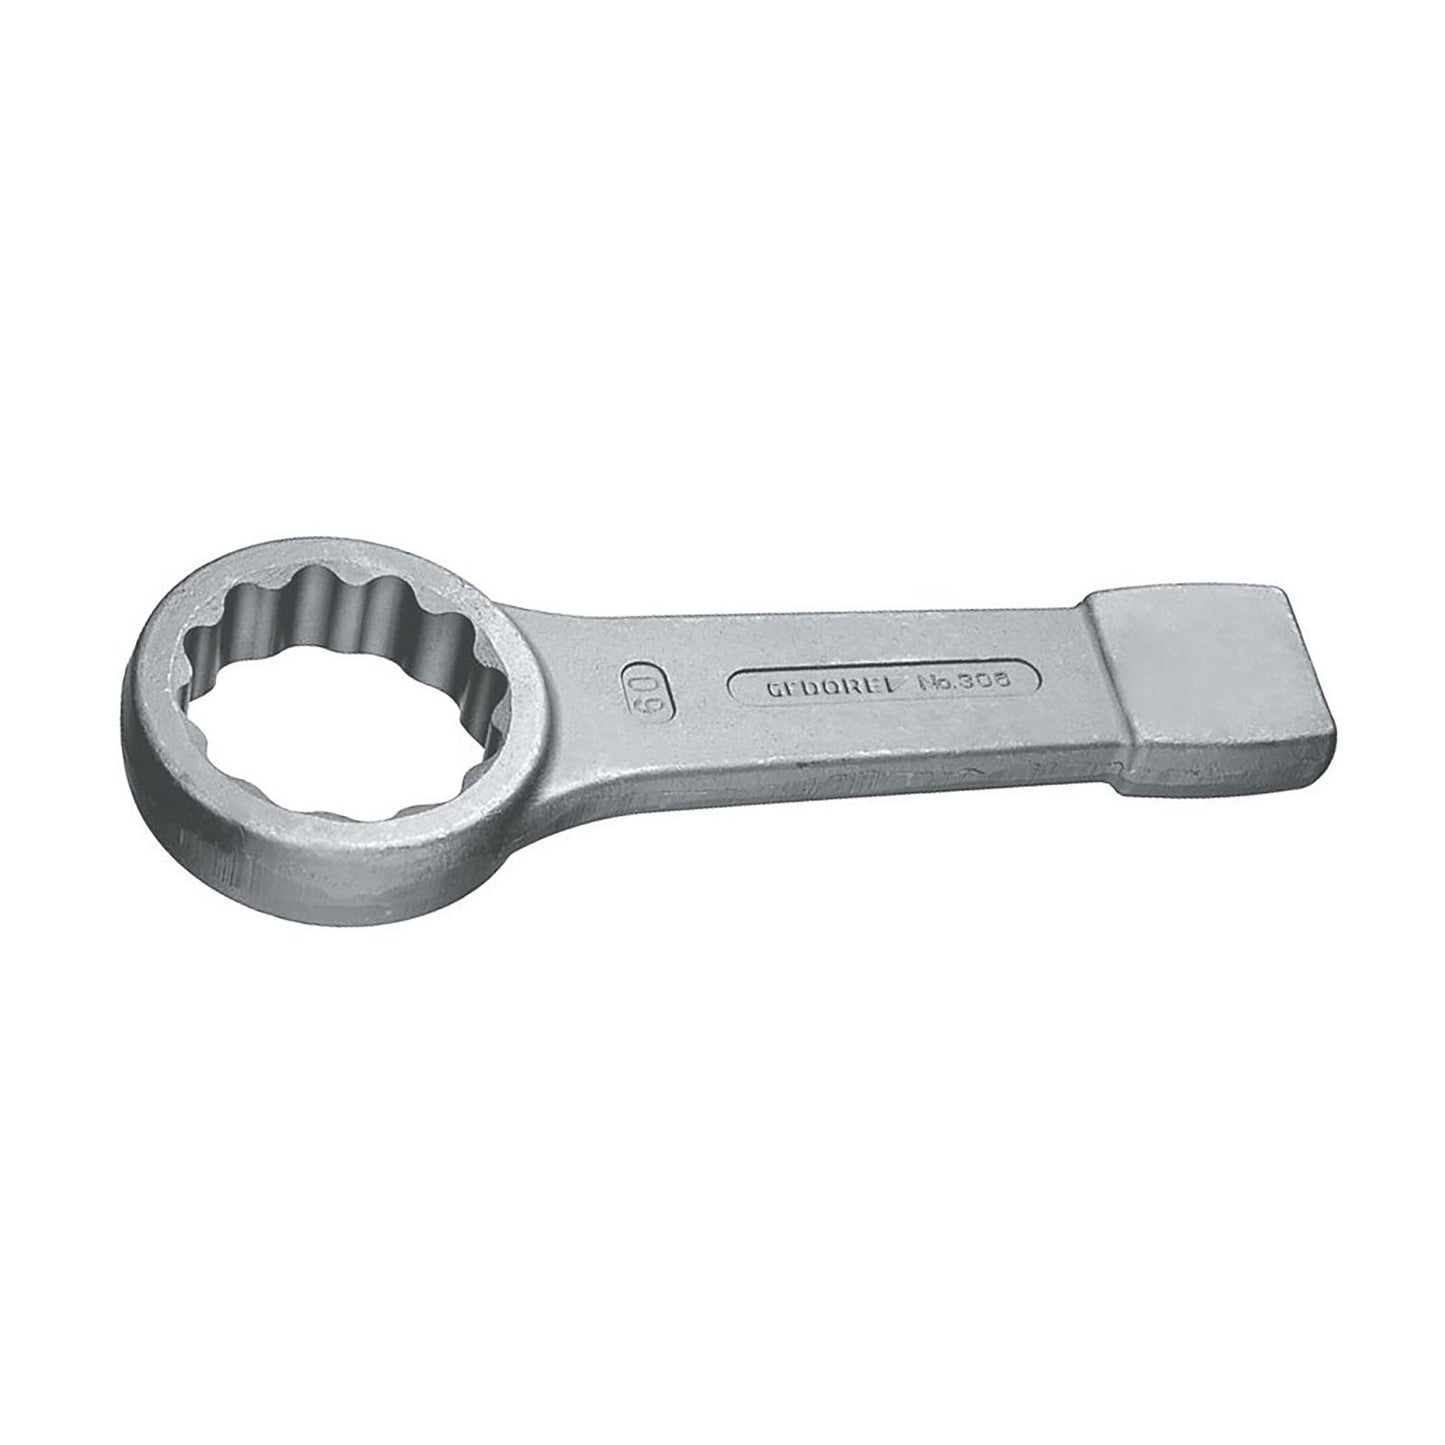 GEDORE 306 80 - Closed Strike Wrench, 80mm (6476400)